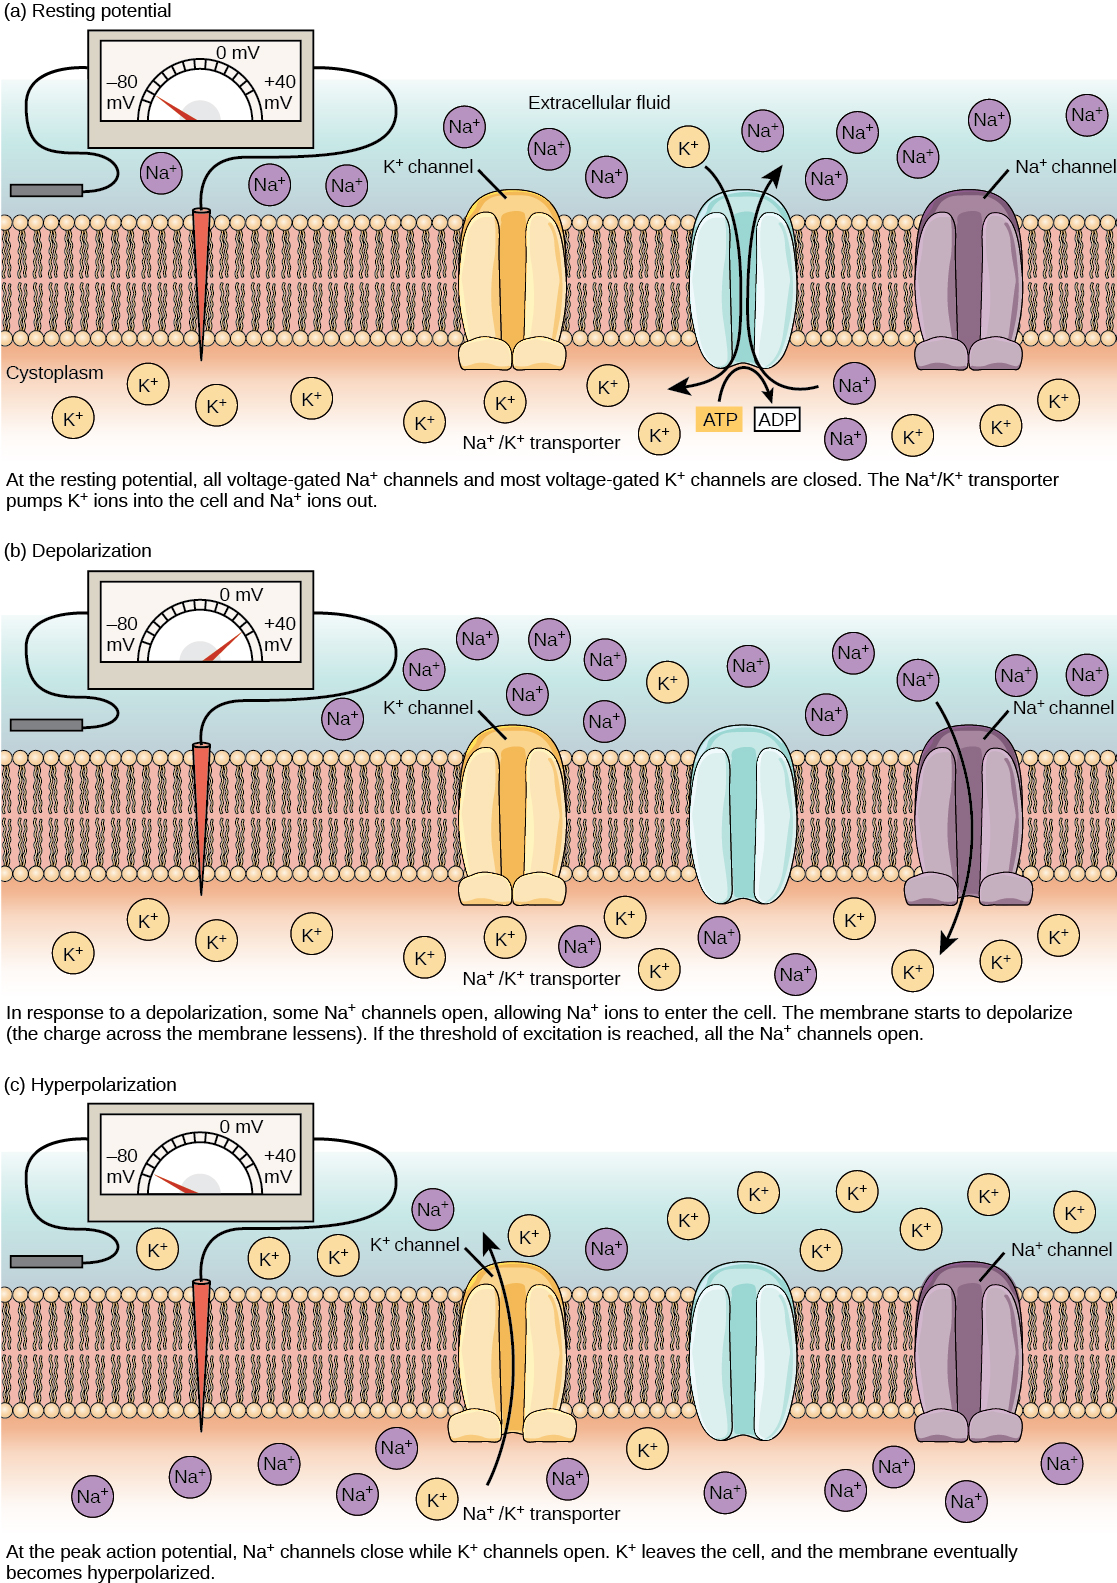 The resting membrane potential of minus seventy volts is maintained by a sodium/potassium transporter that transports sodium ions out of the cell and potassium ions in. Voltage gated sodium and potassium channels are closed. In response to a nerve impulse, some sodium channels open, allowing sodium ions to enter the cell. The membrane starts to depolarize; in other words, the charge across the membrane lessens. If the membrane potential increases to the threshold of excitation, all the sodium channels open. At the peak action potential, potassium channels open and potassium ions leave the cell. The membrane eventually becomes hyperpolarized.